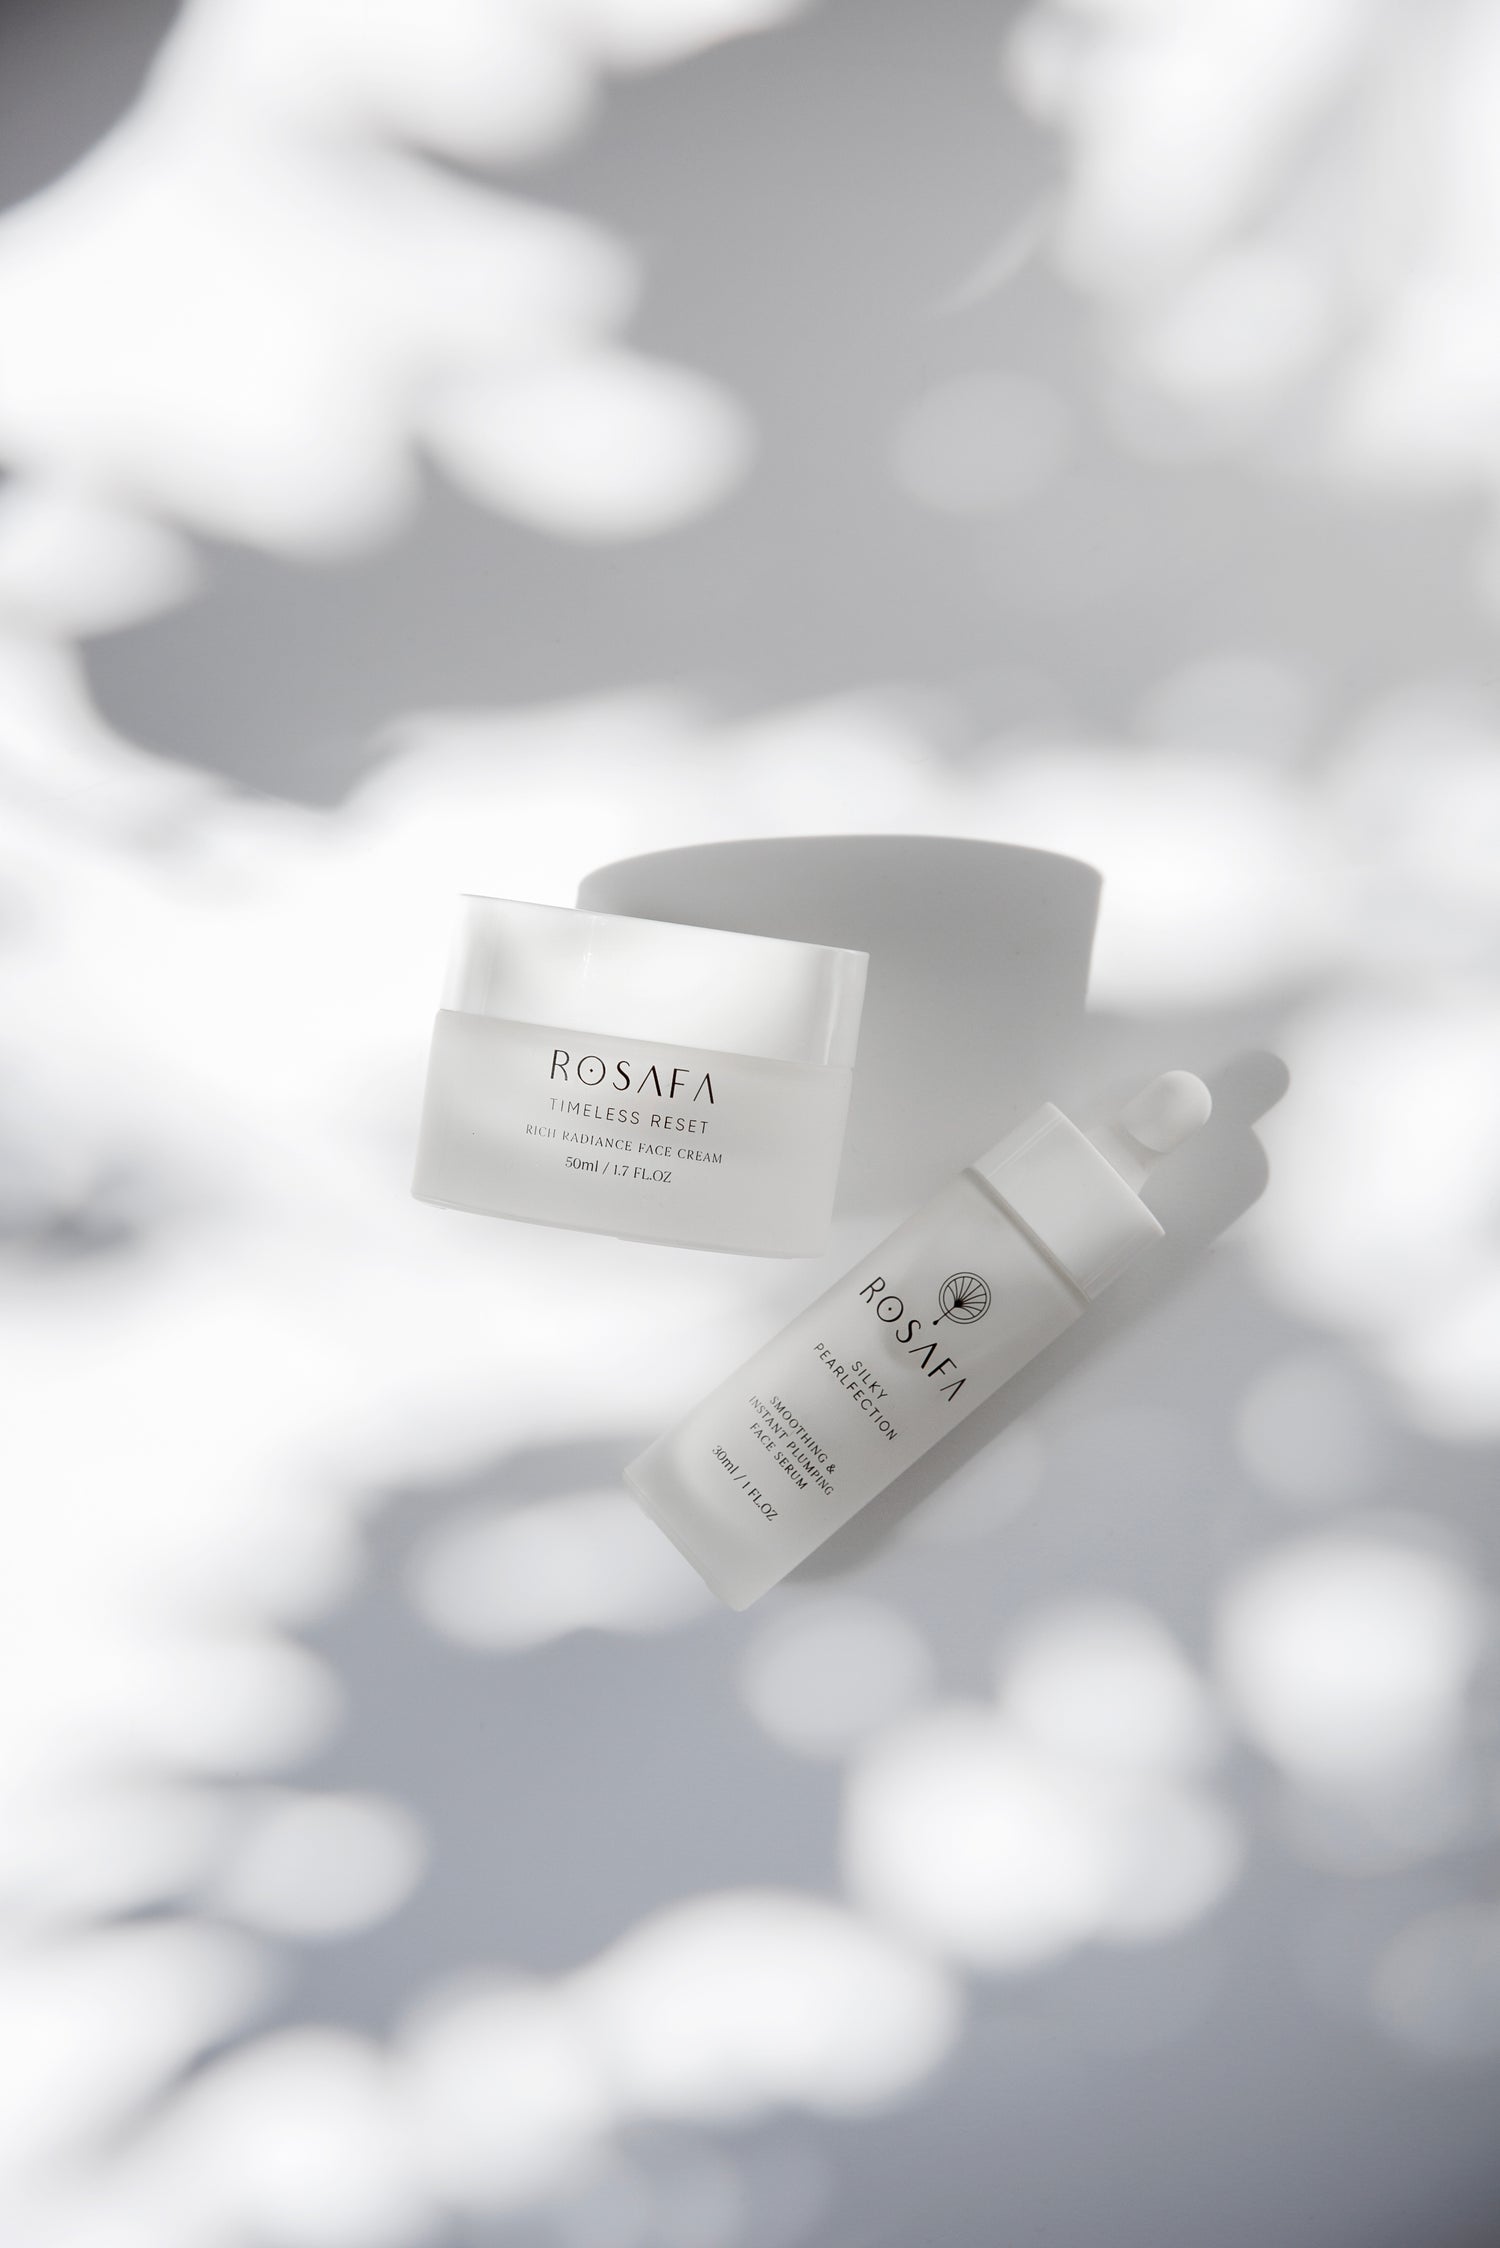 timeless reset rich radiance face cream and silky pearlfection face serum by rosafa